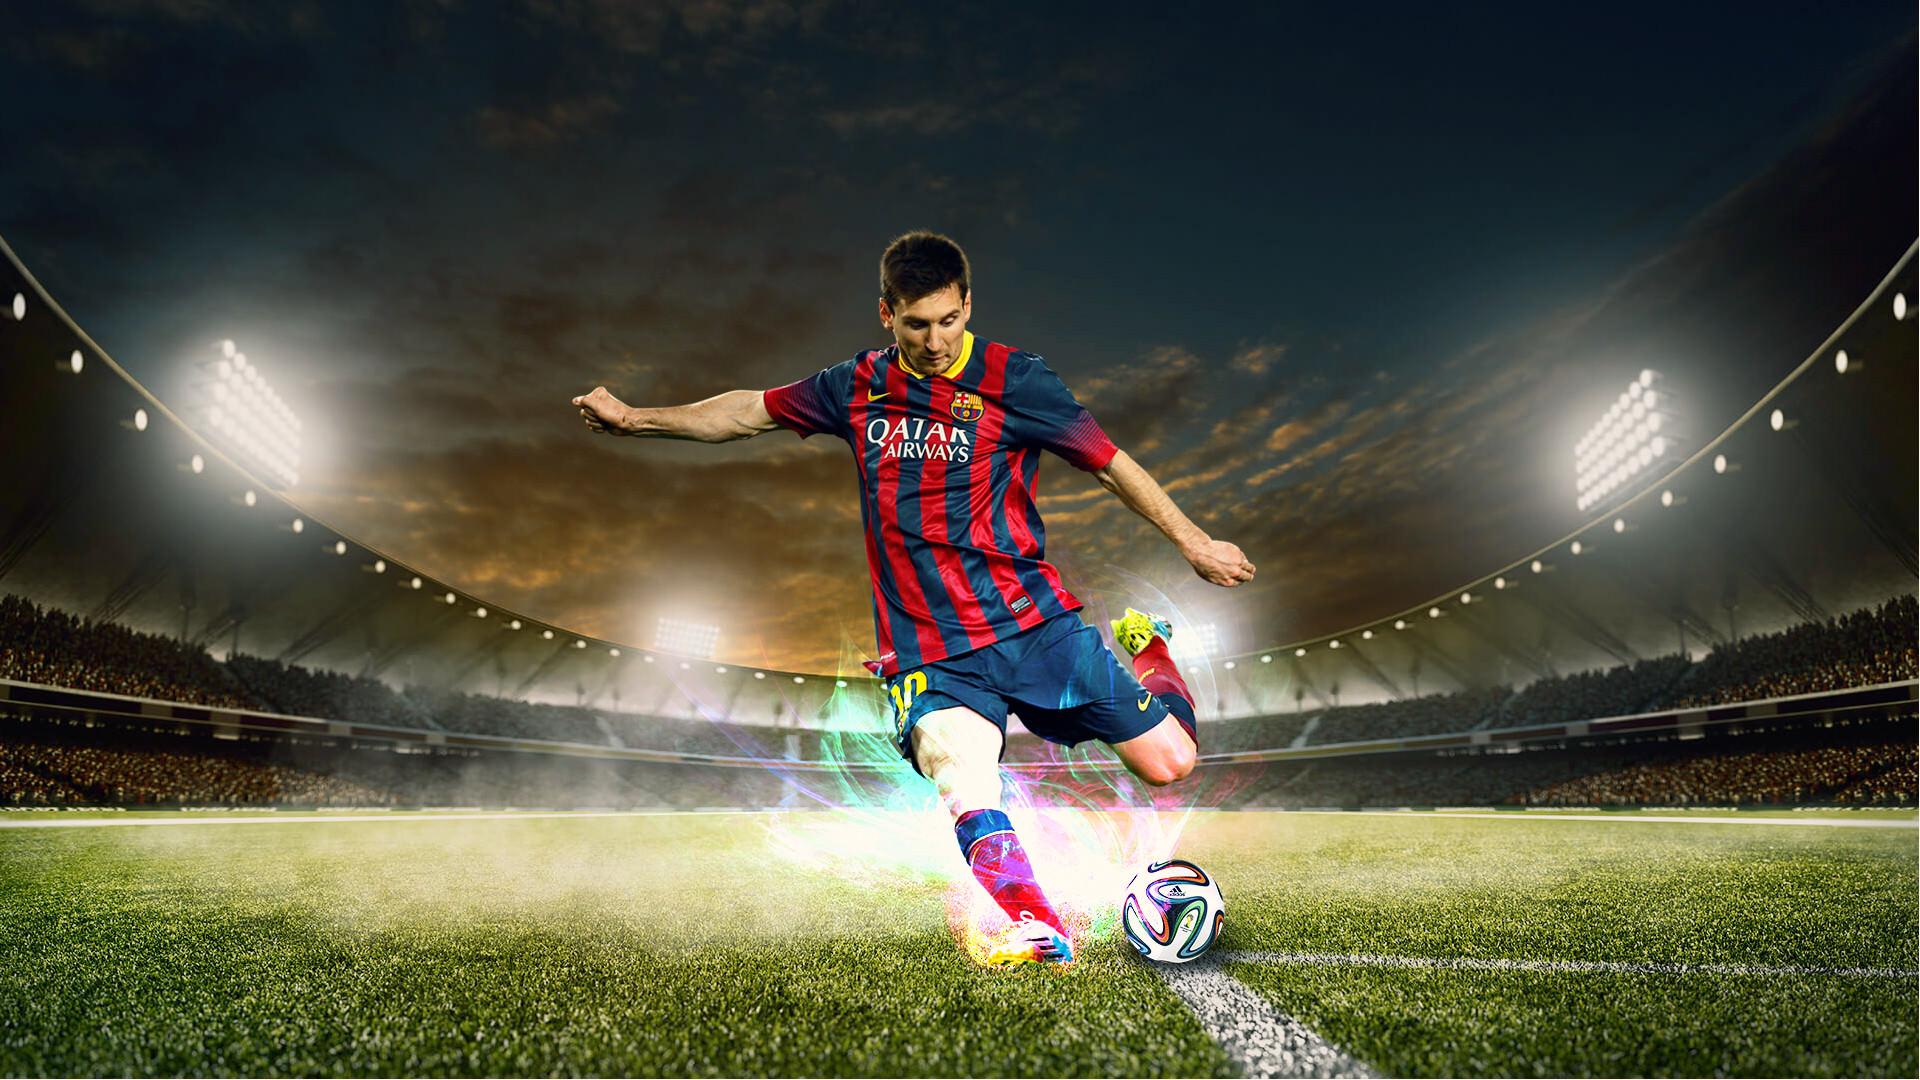 Detail Hd Football Pictures Nomer 19